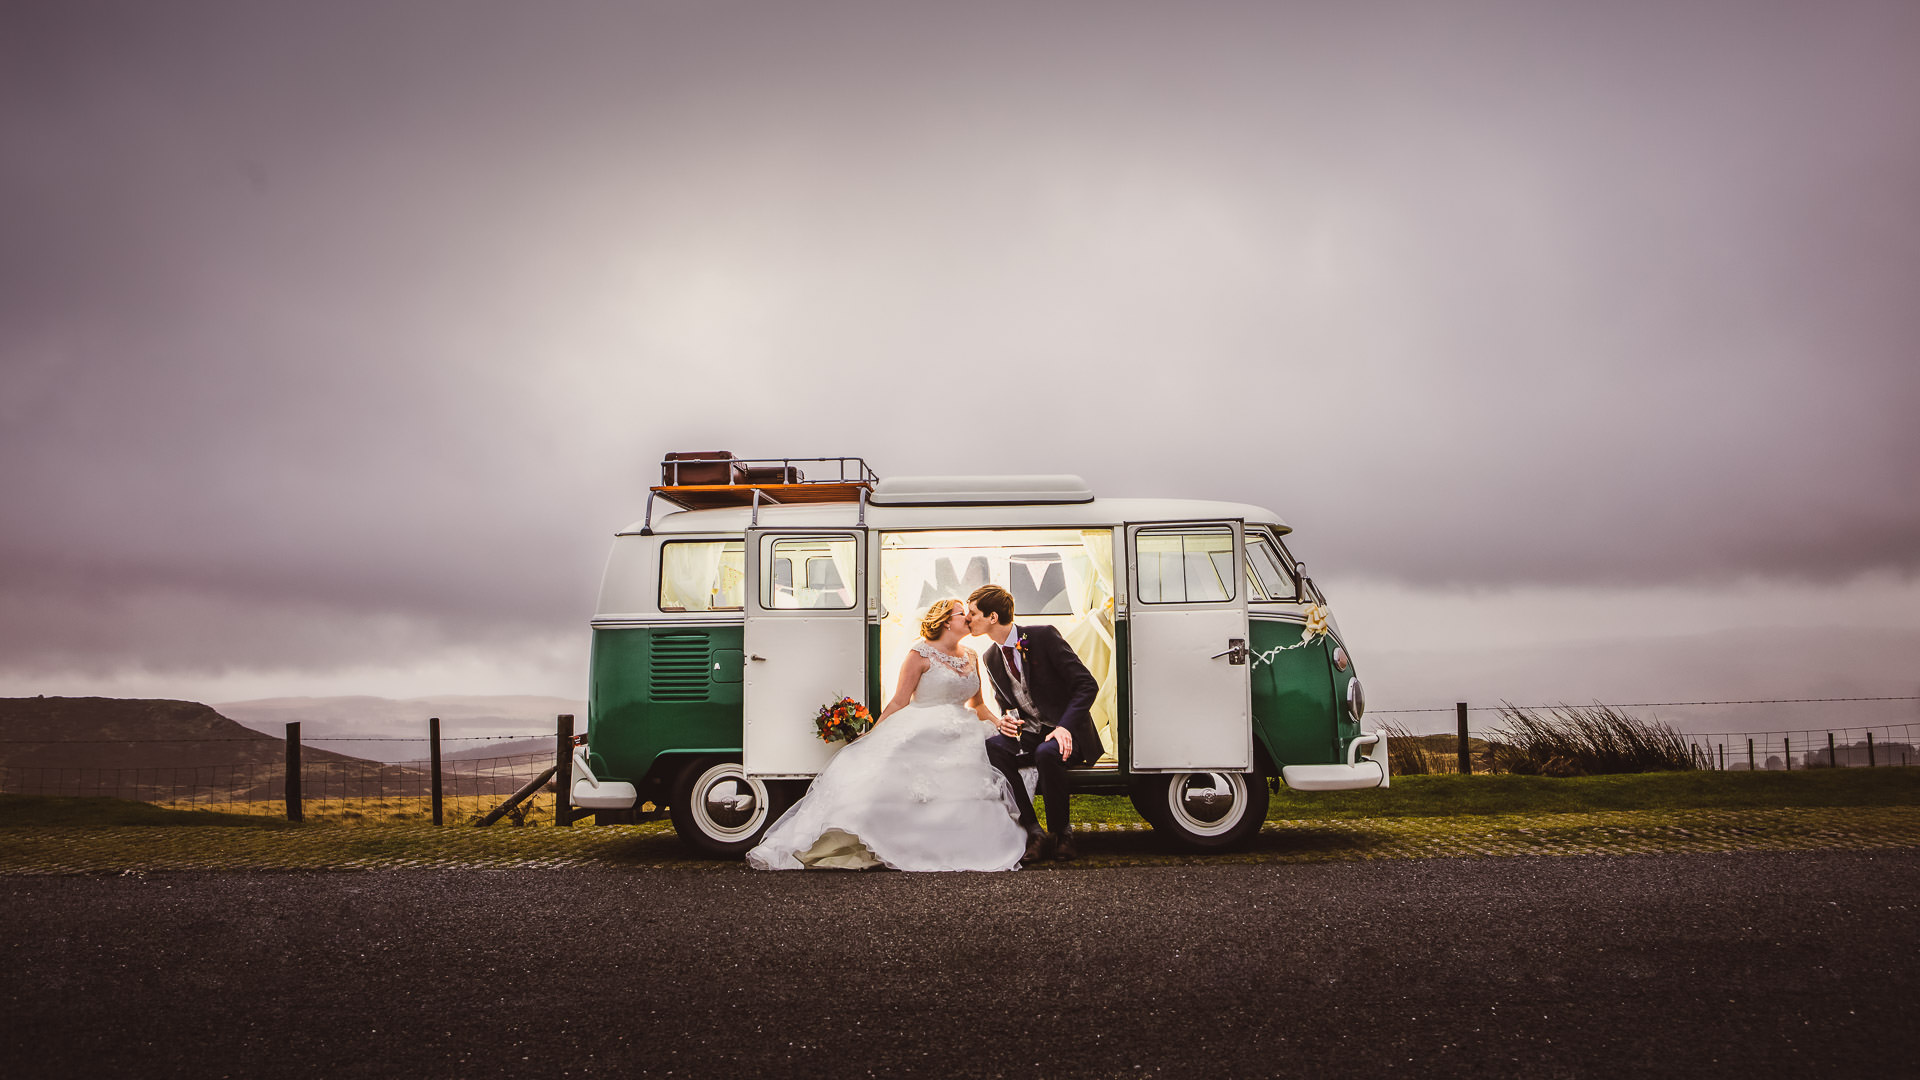 Beautiful wedding photography by Mark Tierney.